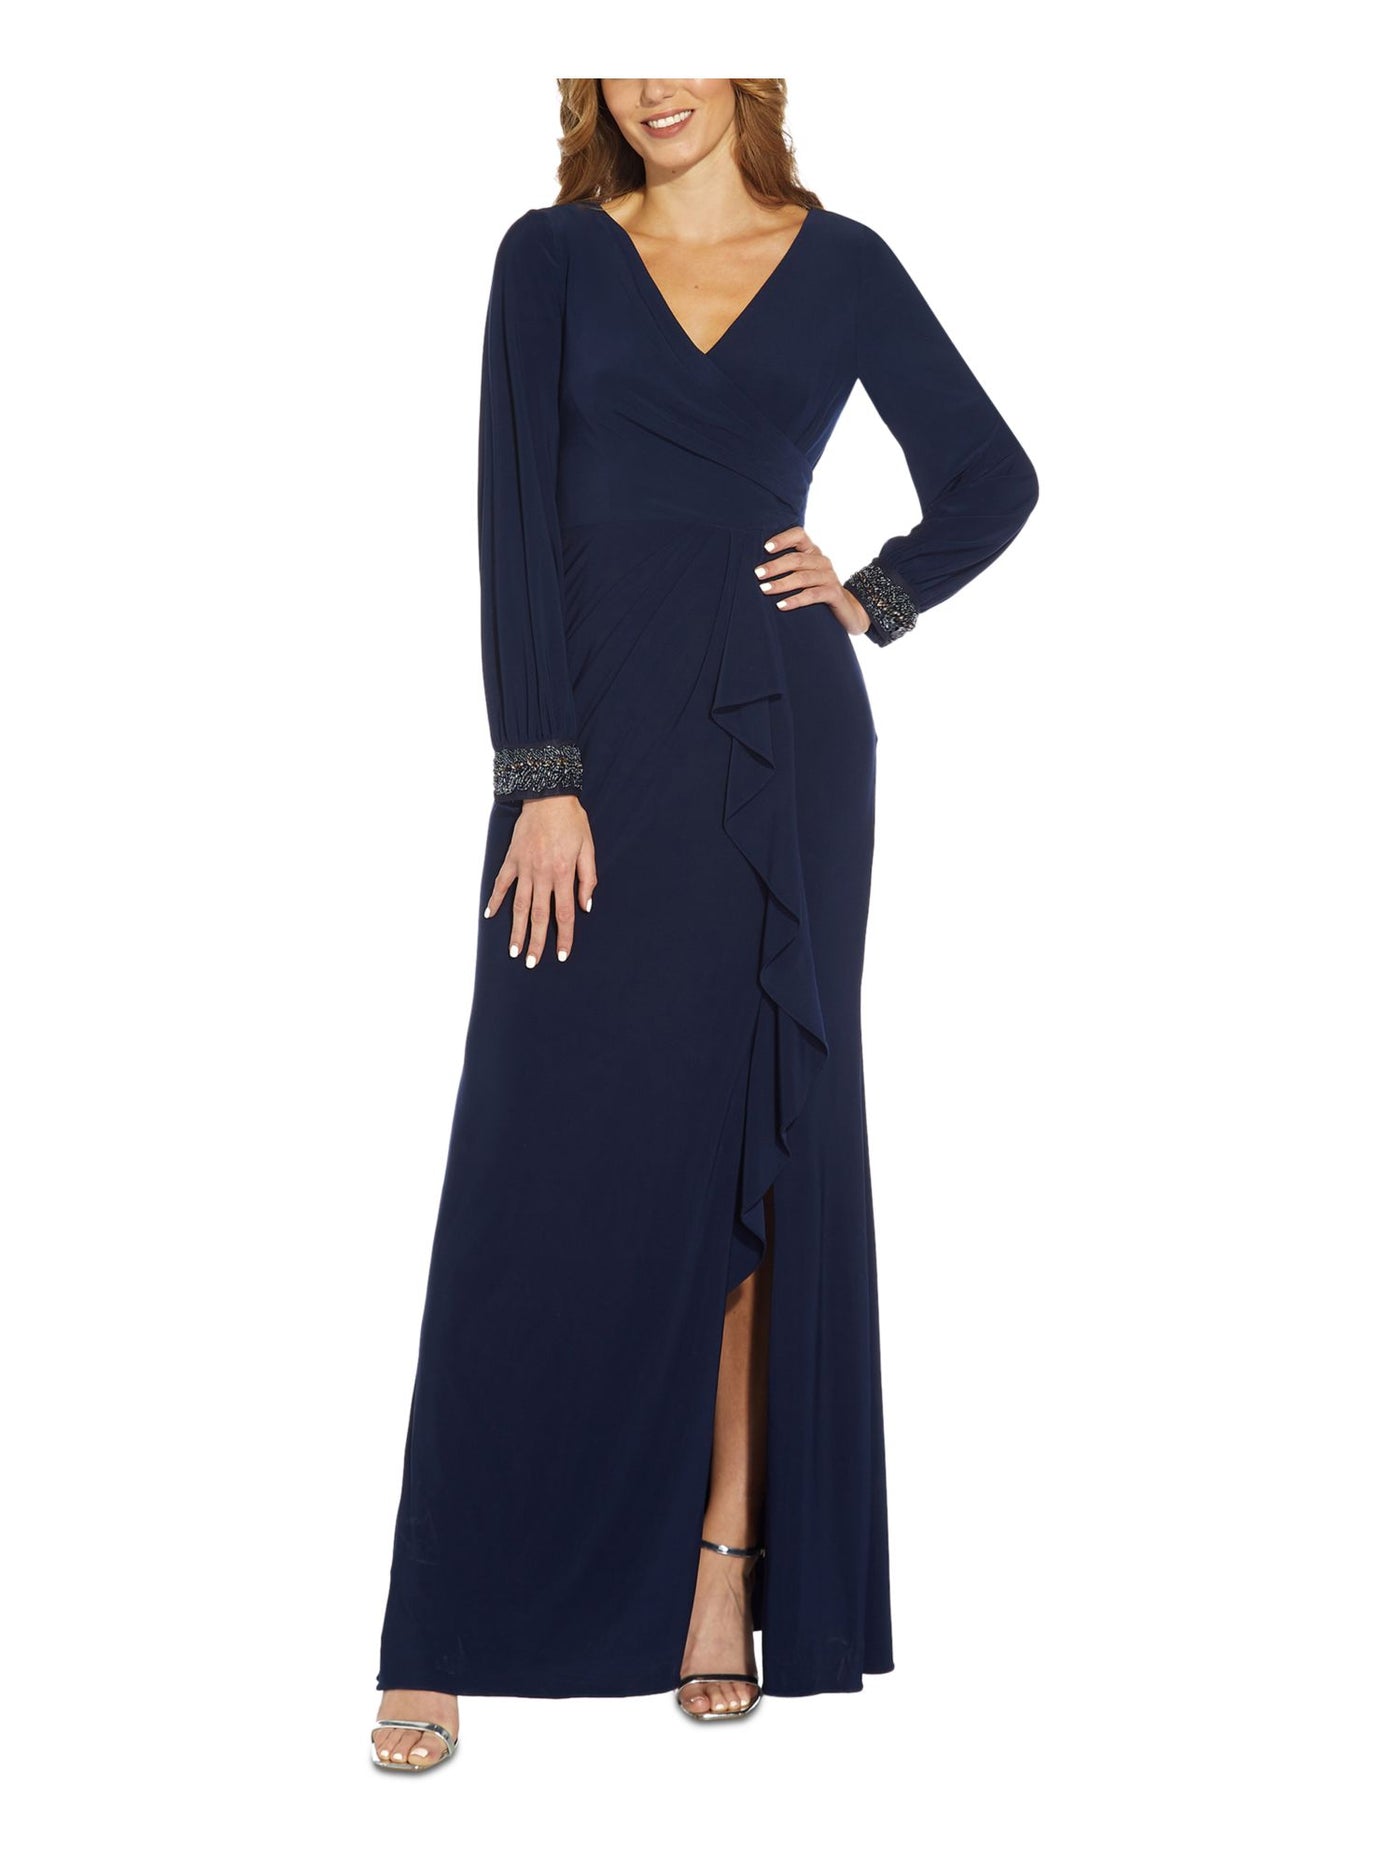 ADRIANNA PAPELL Womens Navy Zippered Pleated Ruffled Slit Lined Long Sleeve Surplice Neckline Full-Length Evening Gown Dress 6